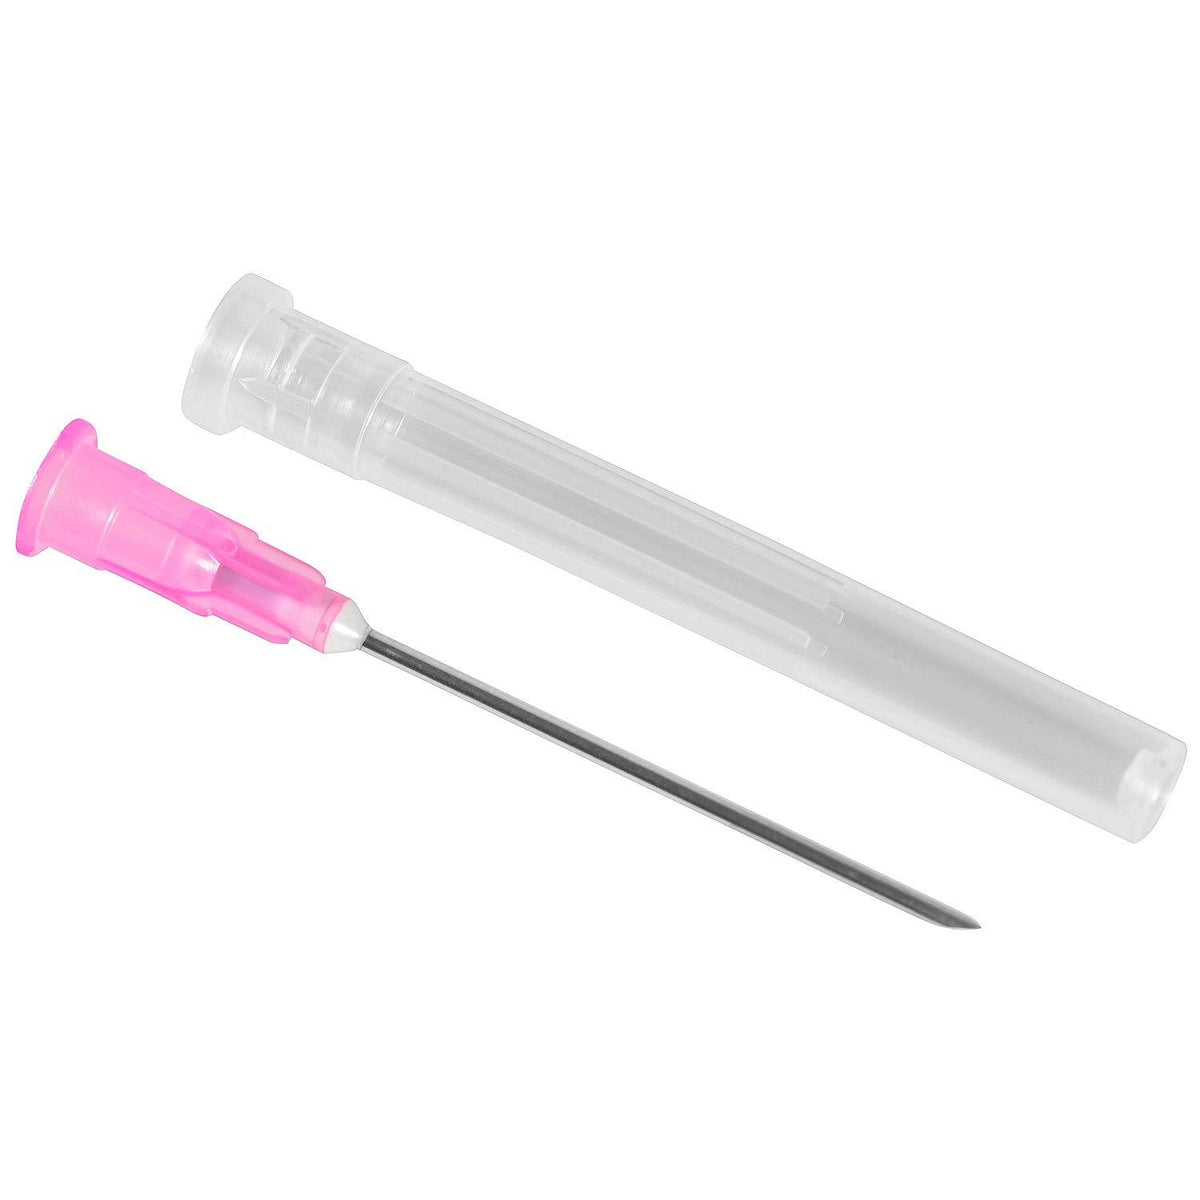 18G, 1.5 Inch Hypodermic Needle (Sterile) - The First Aid Gear Shop